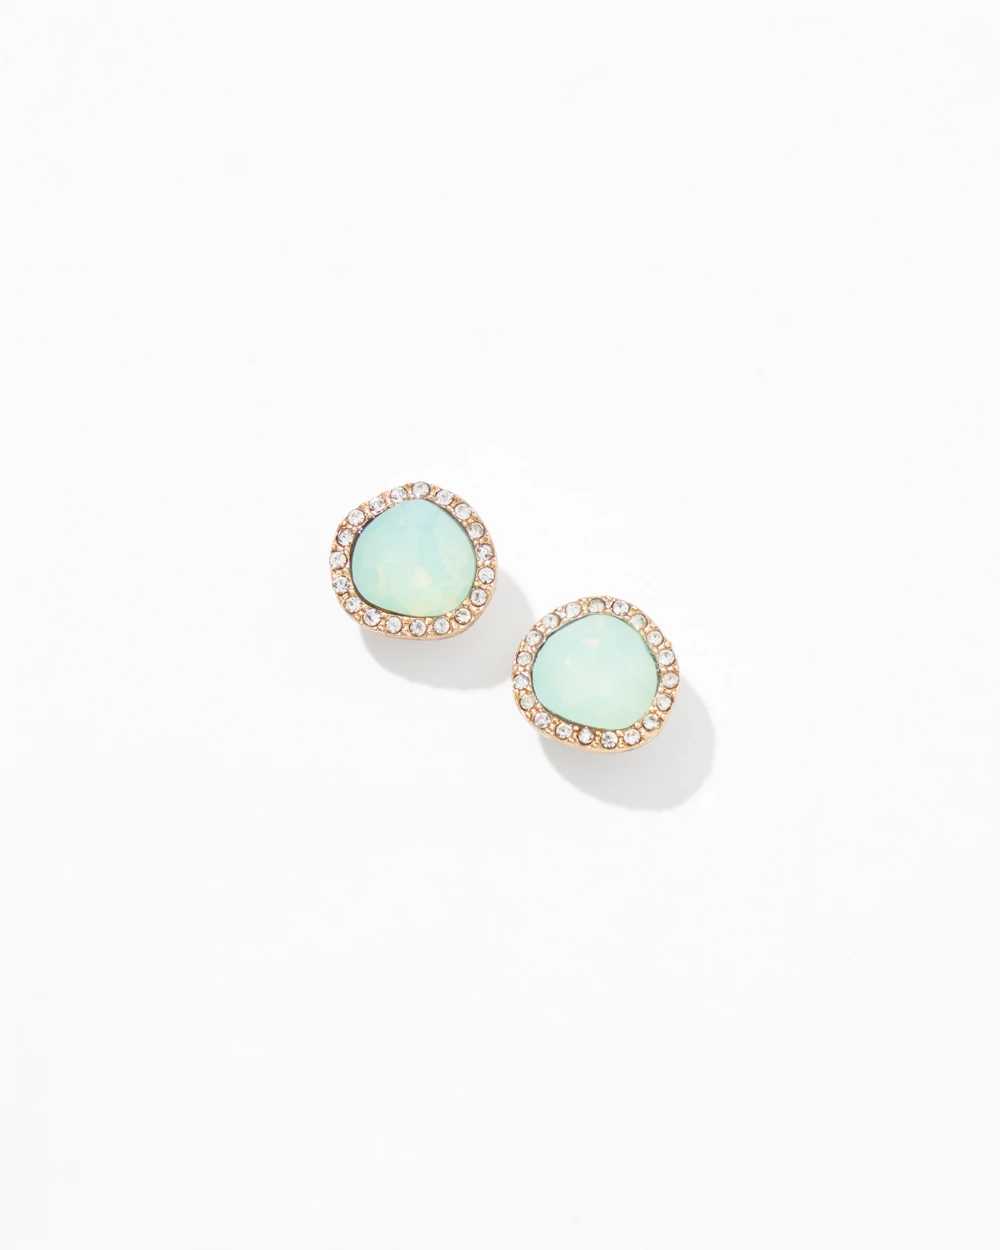 Gold Pave Stone Stud Earrings click to view larger image.